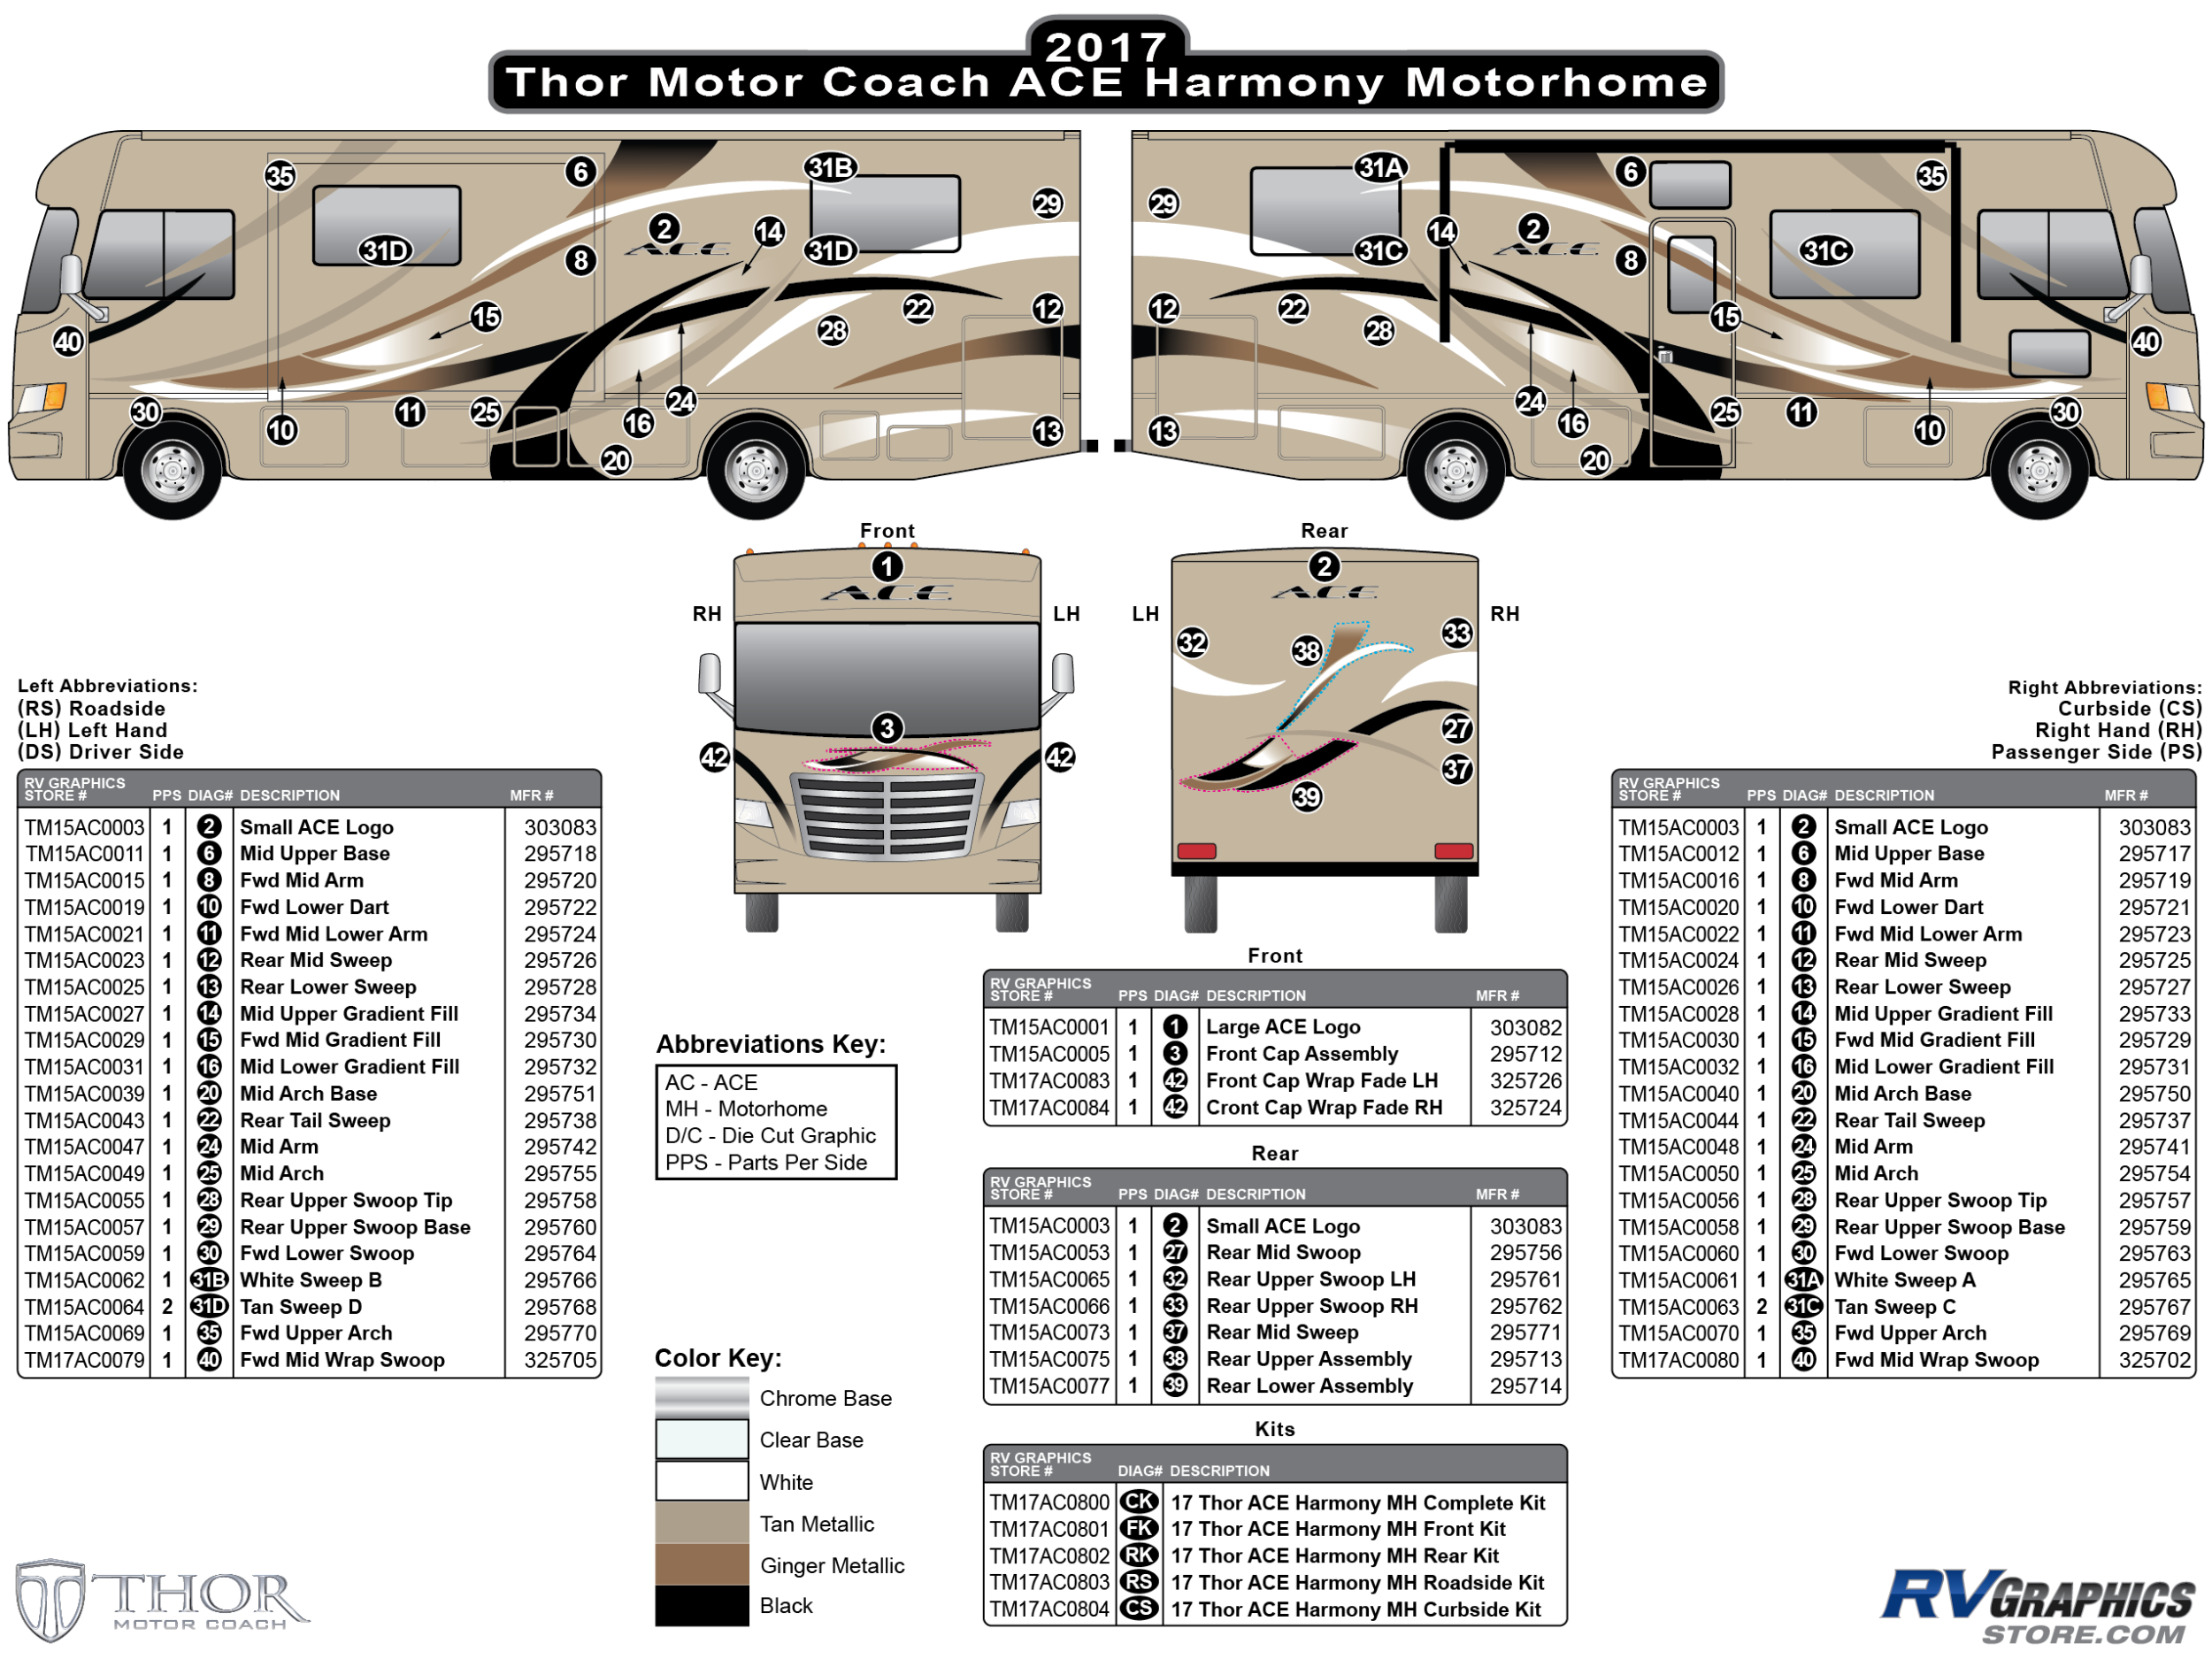 ACE - 2017 ACE MH-Motorhome Harmony (Gold) Version